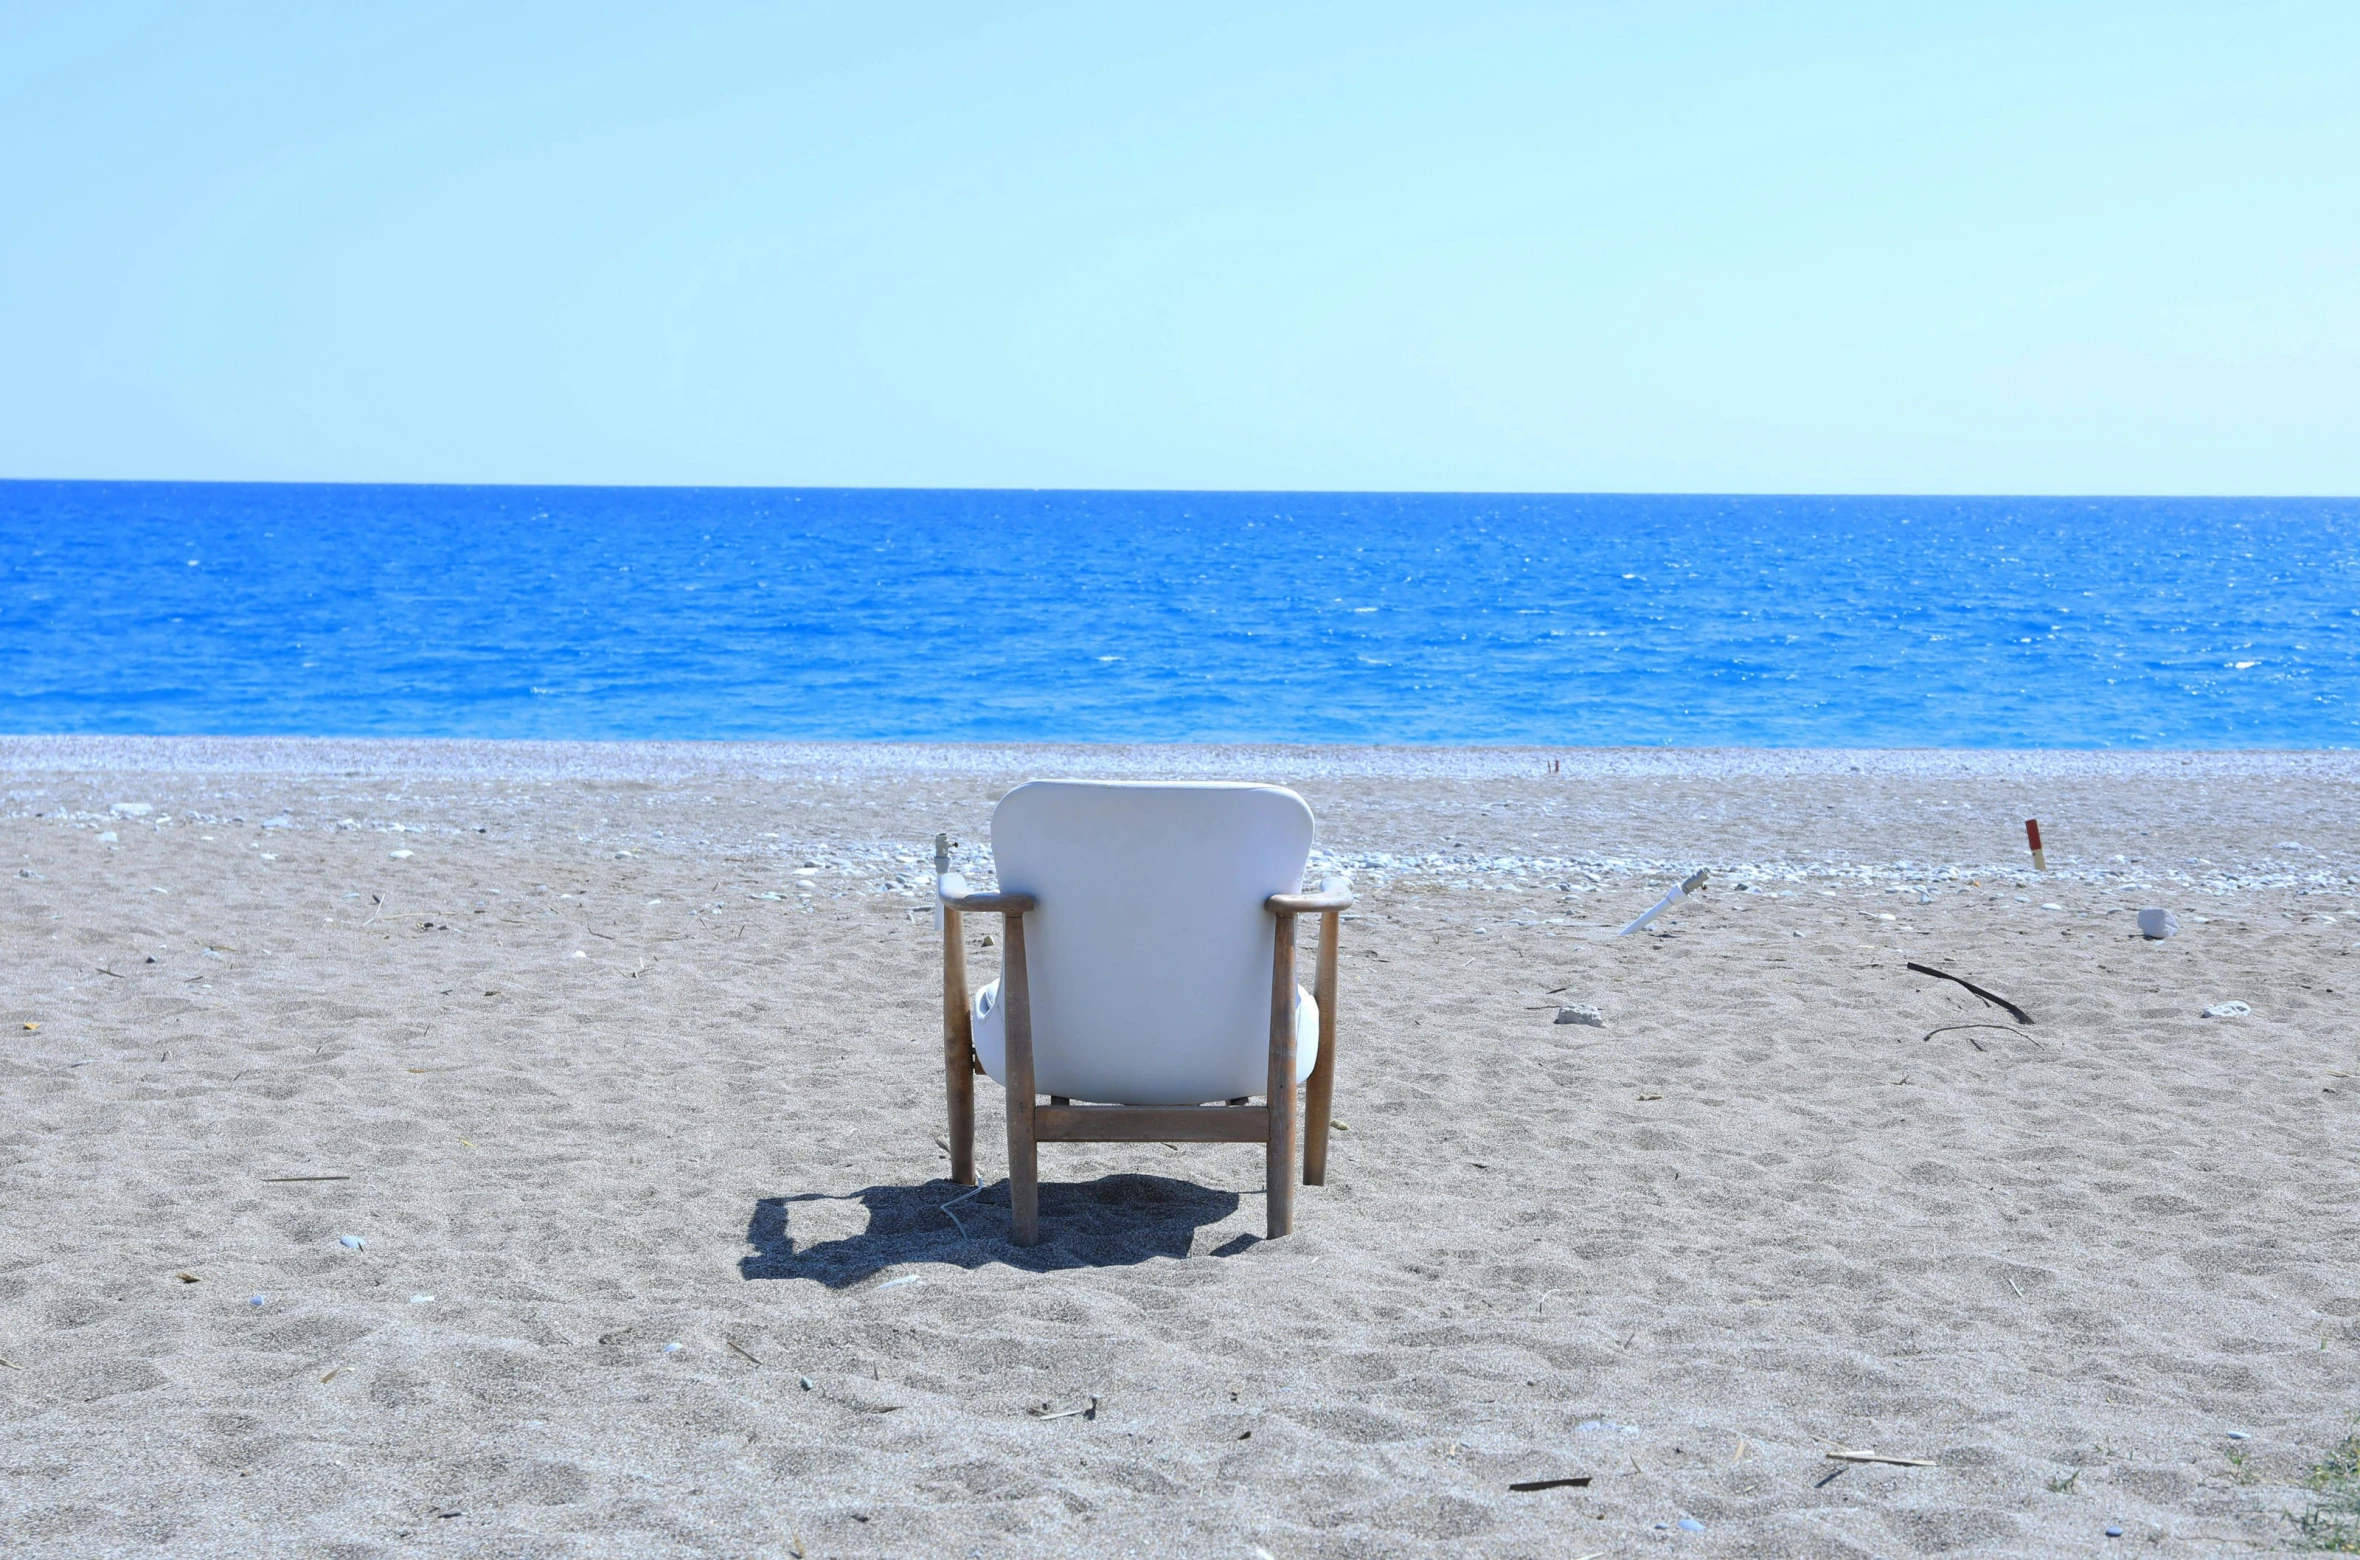 the chair is on the beach waiting for people to come in